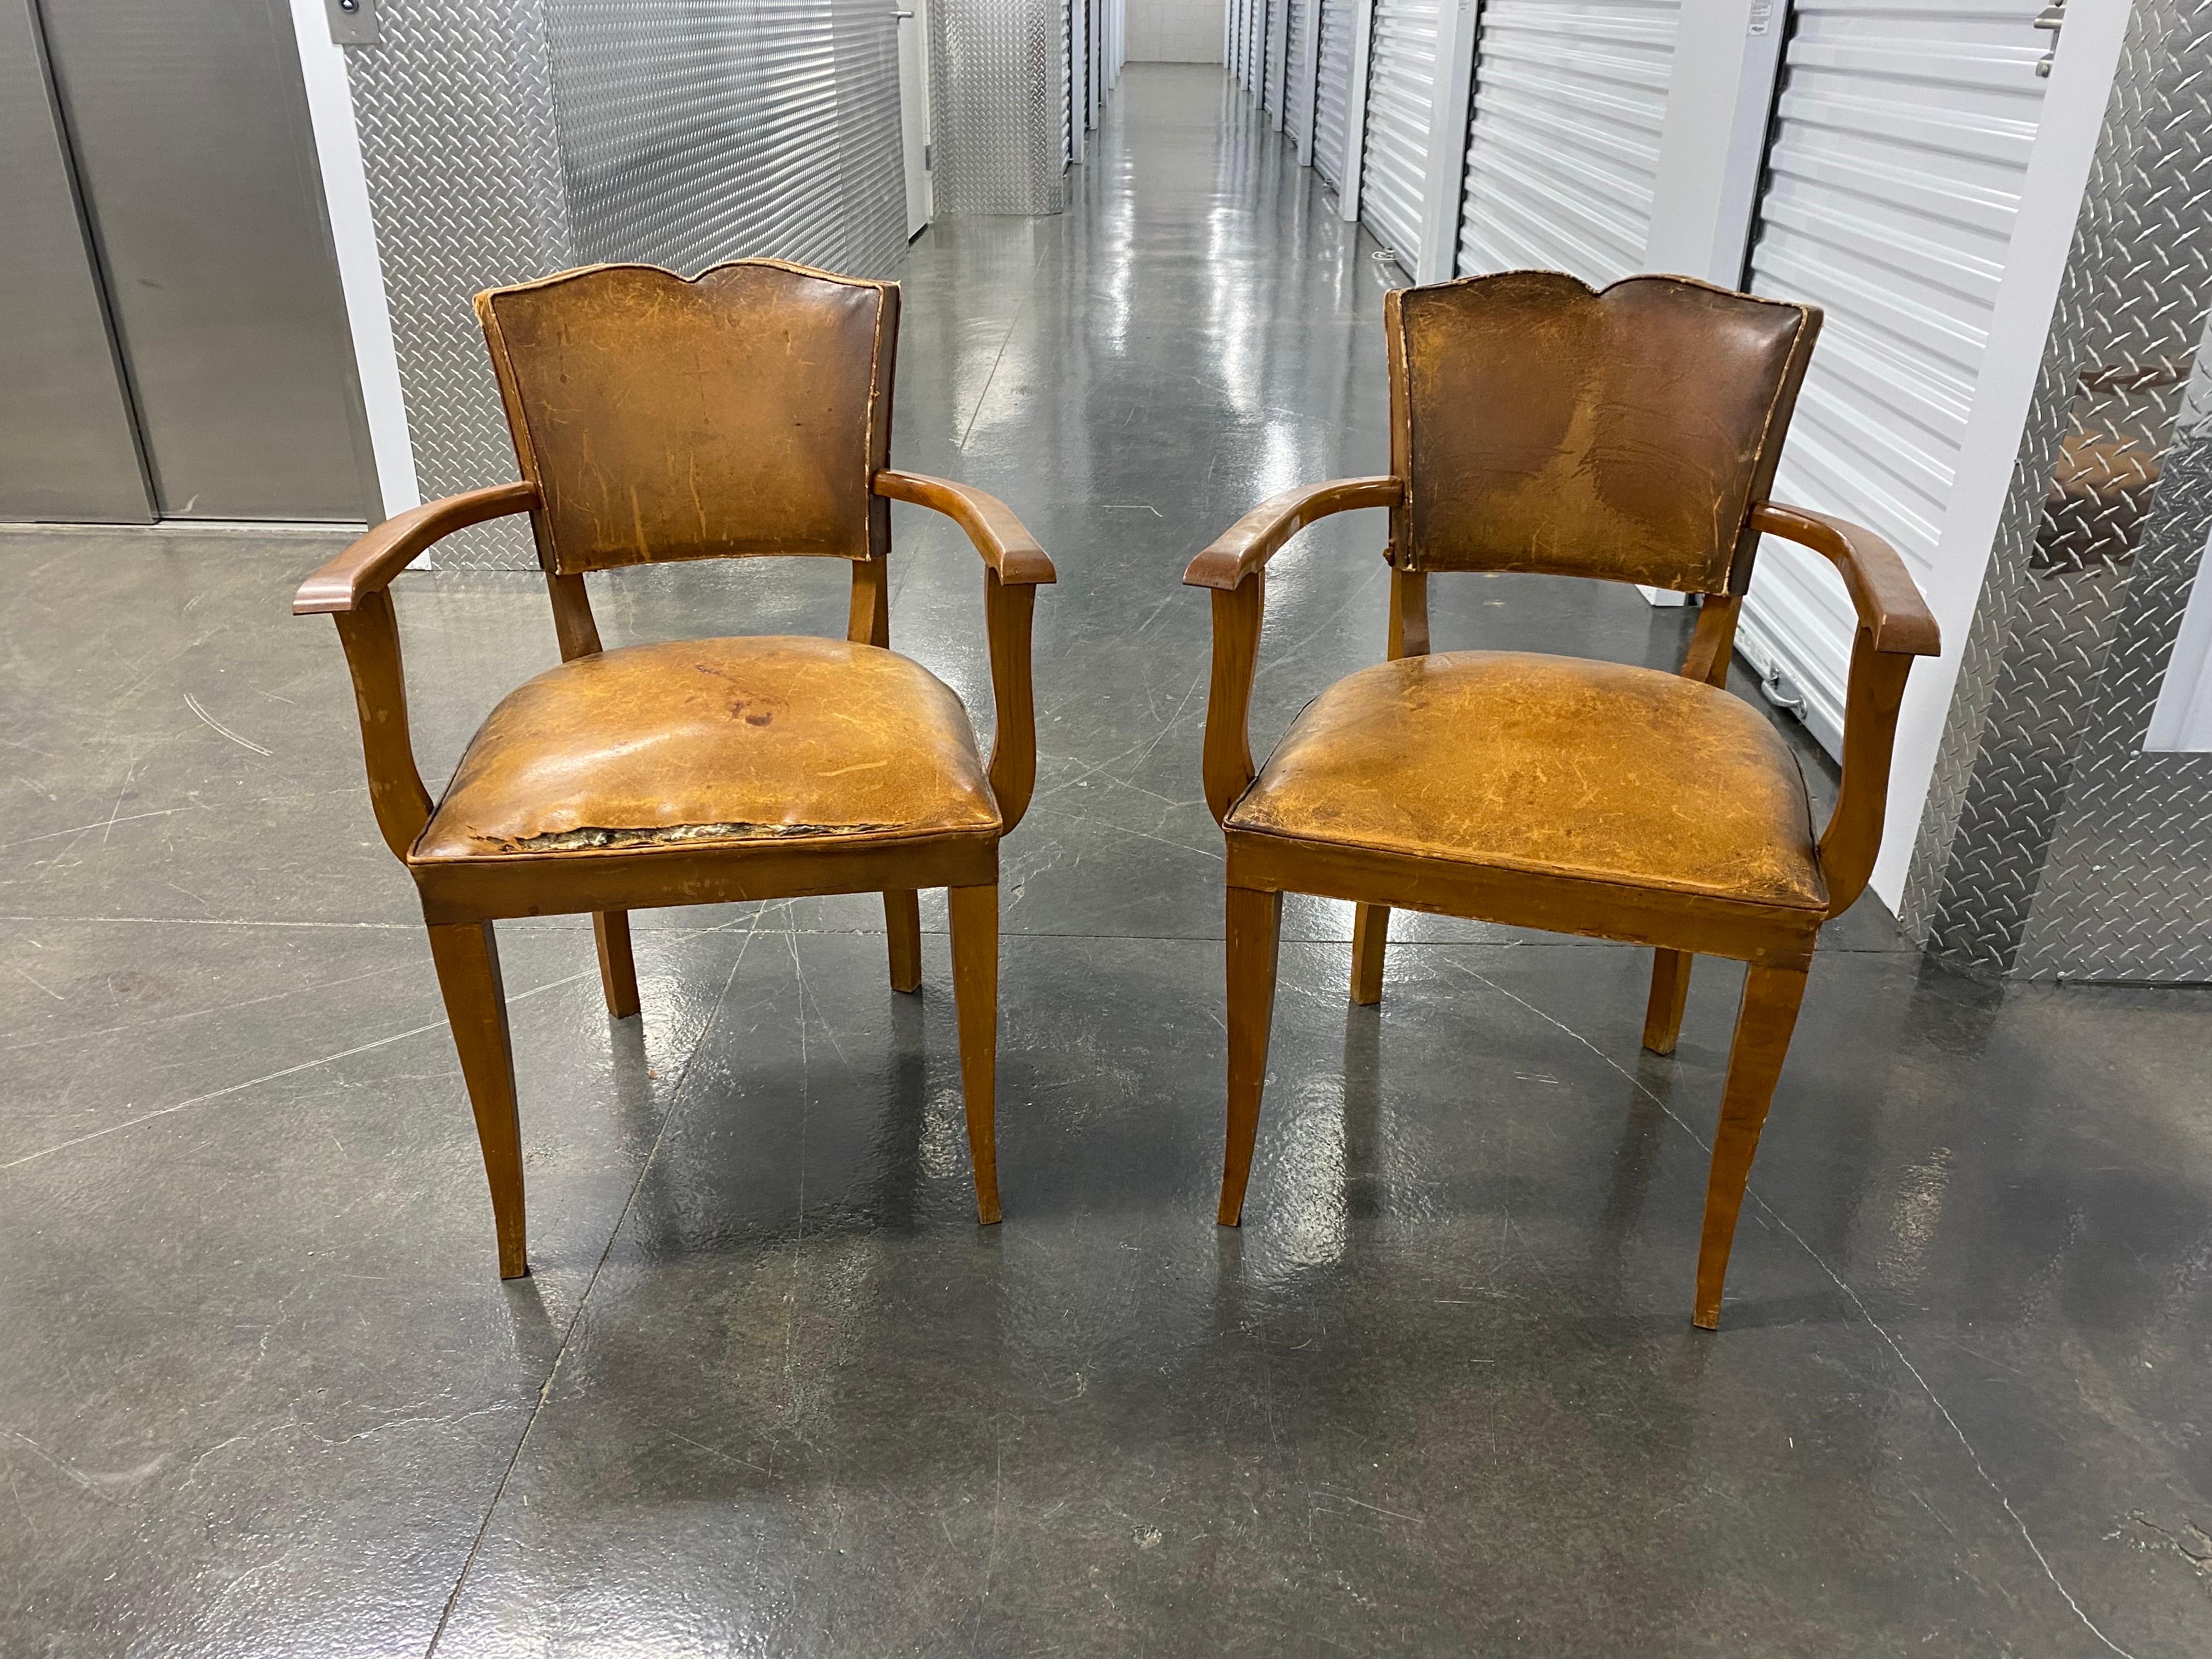 Pair of French Art Deco leather Moustache armchairs, 1930s
A handsome pair of taller armchairs. Classic Art Deco moustache lines on seat back, arms have a slight clean lined curve and, also echoed in the tapering legs. The leather has a wonderful